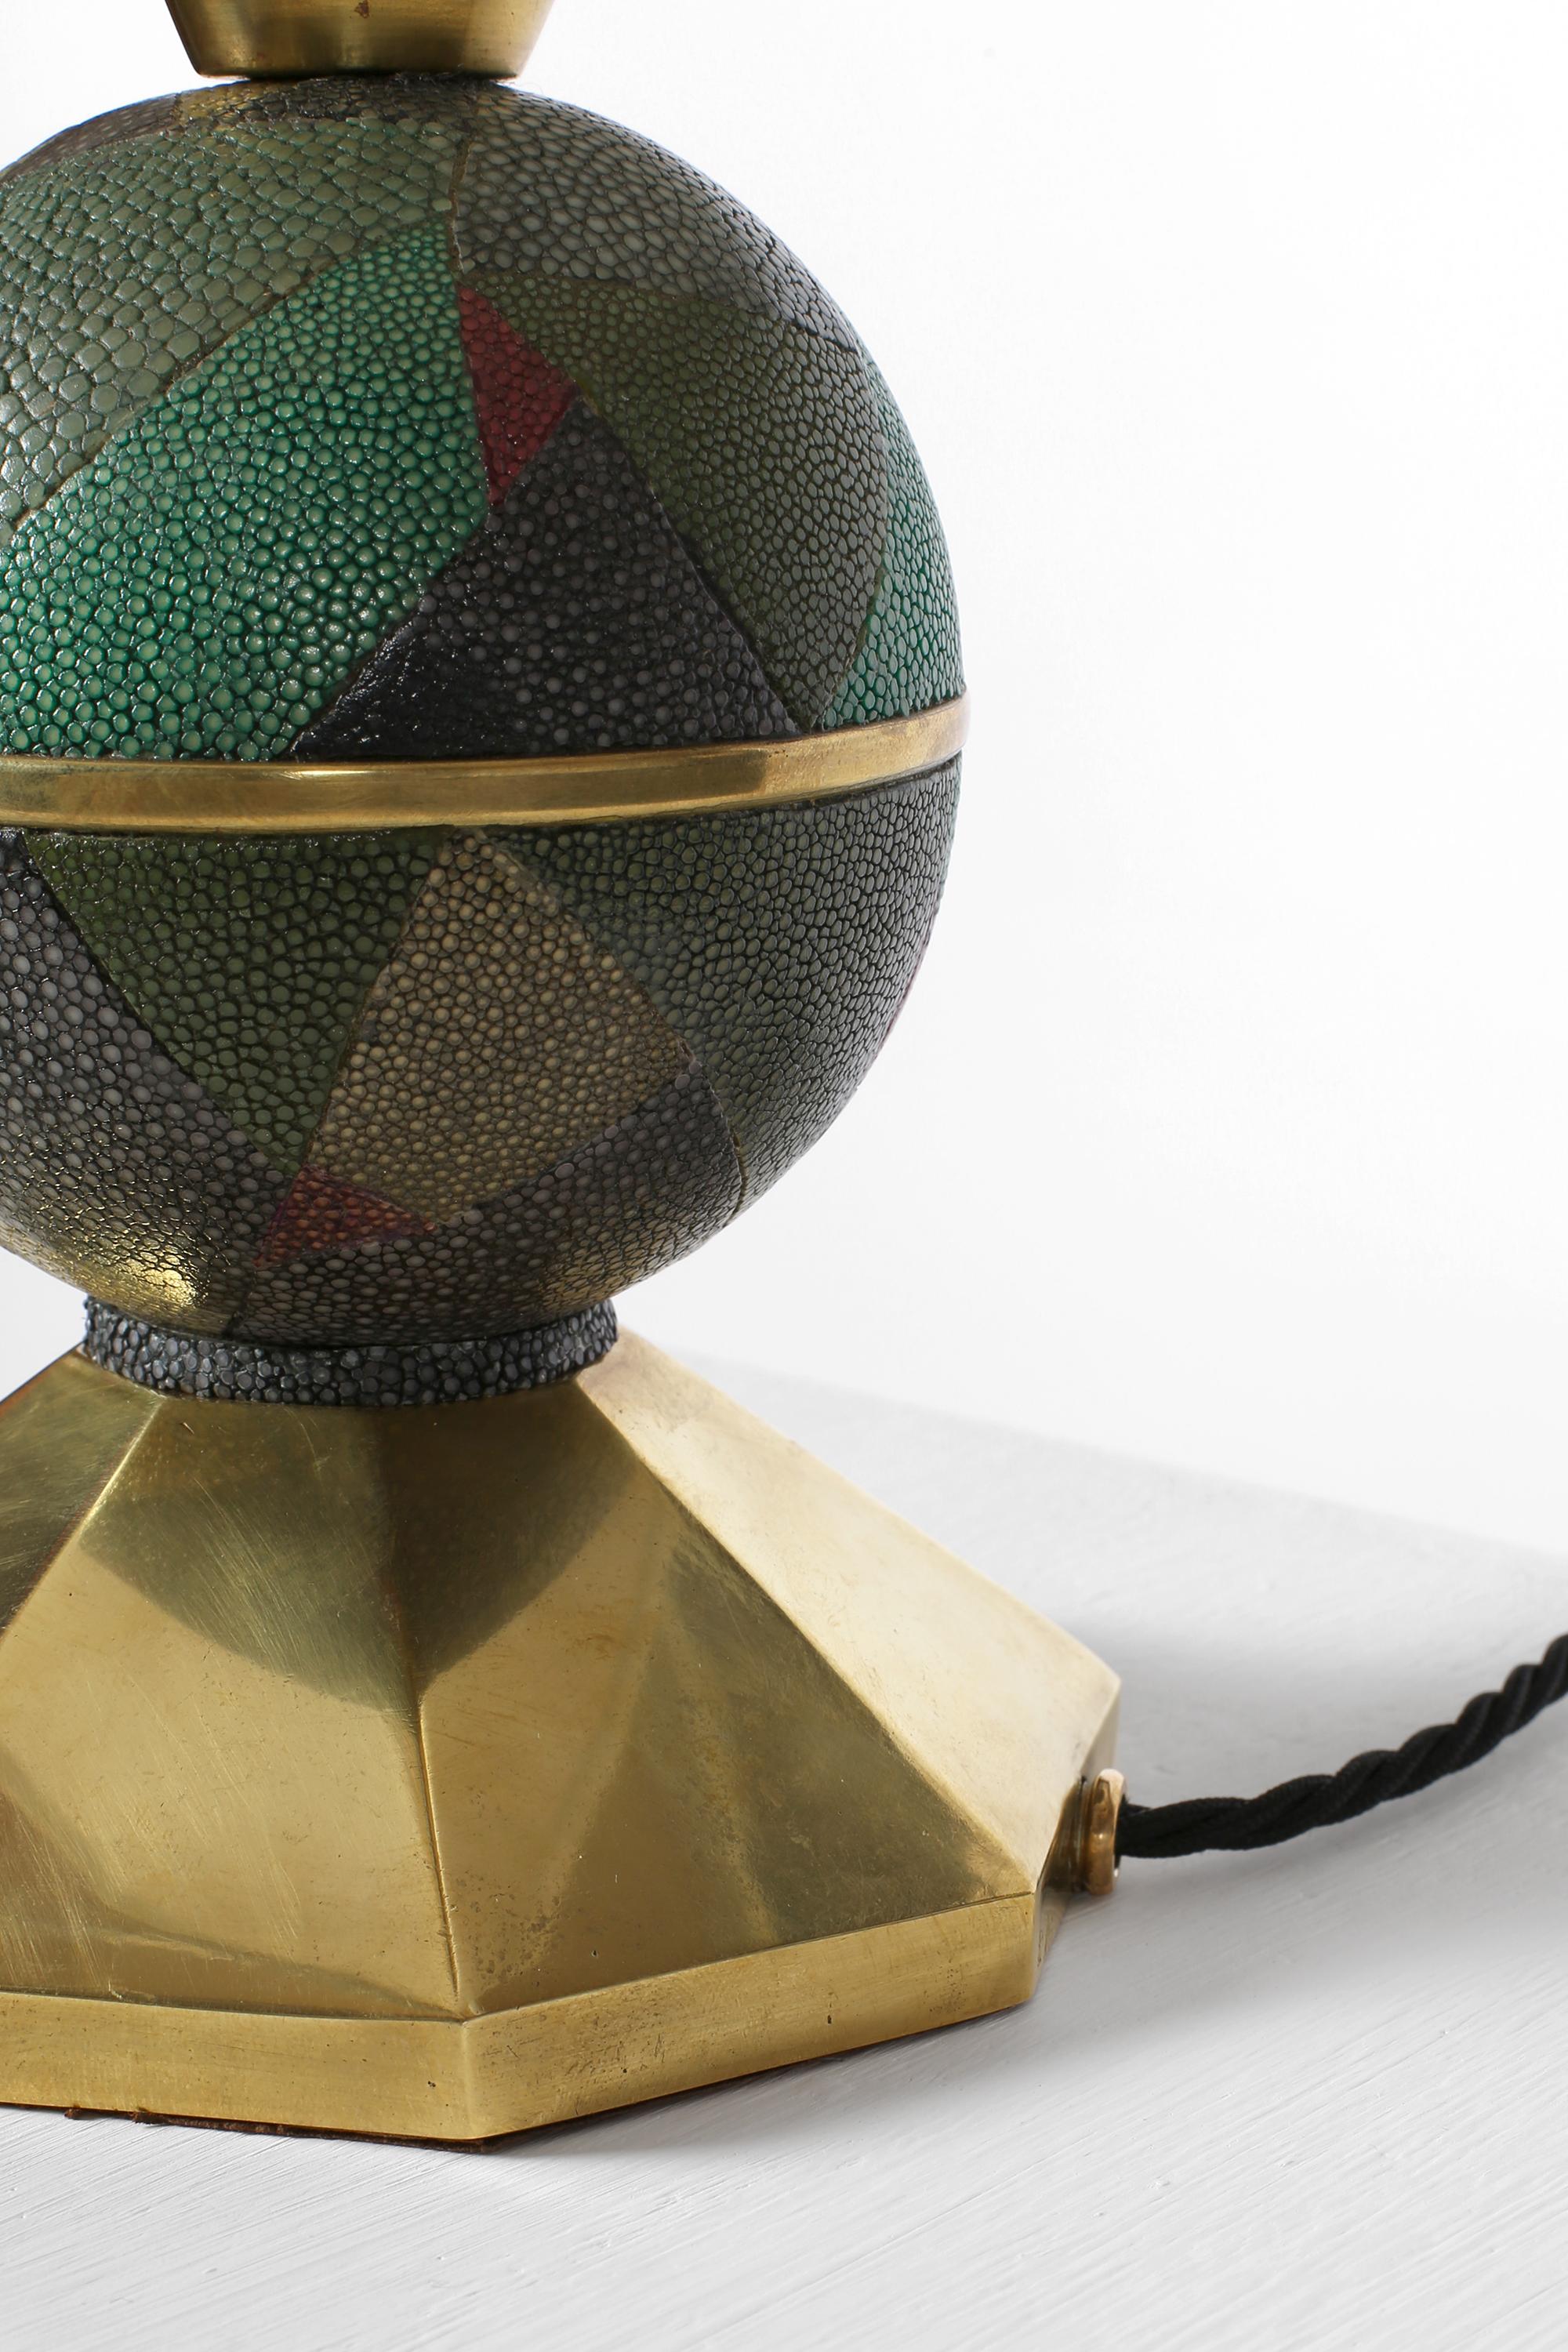 French 1930s Art Deco Table Lamp by André Groult in Galuchat & Gilt Bronze 3